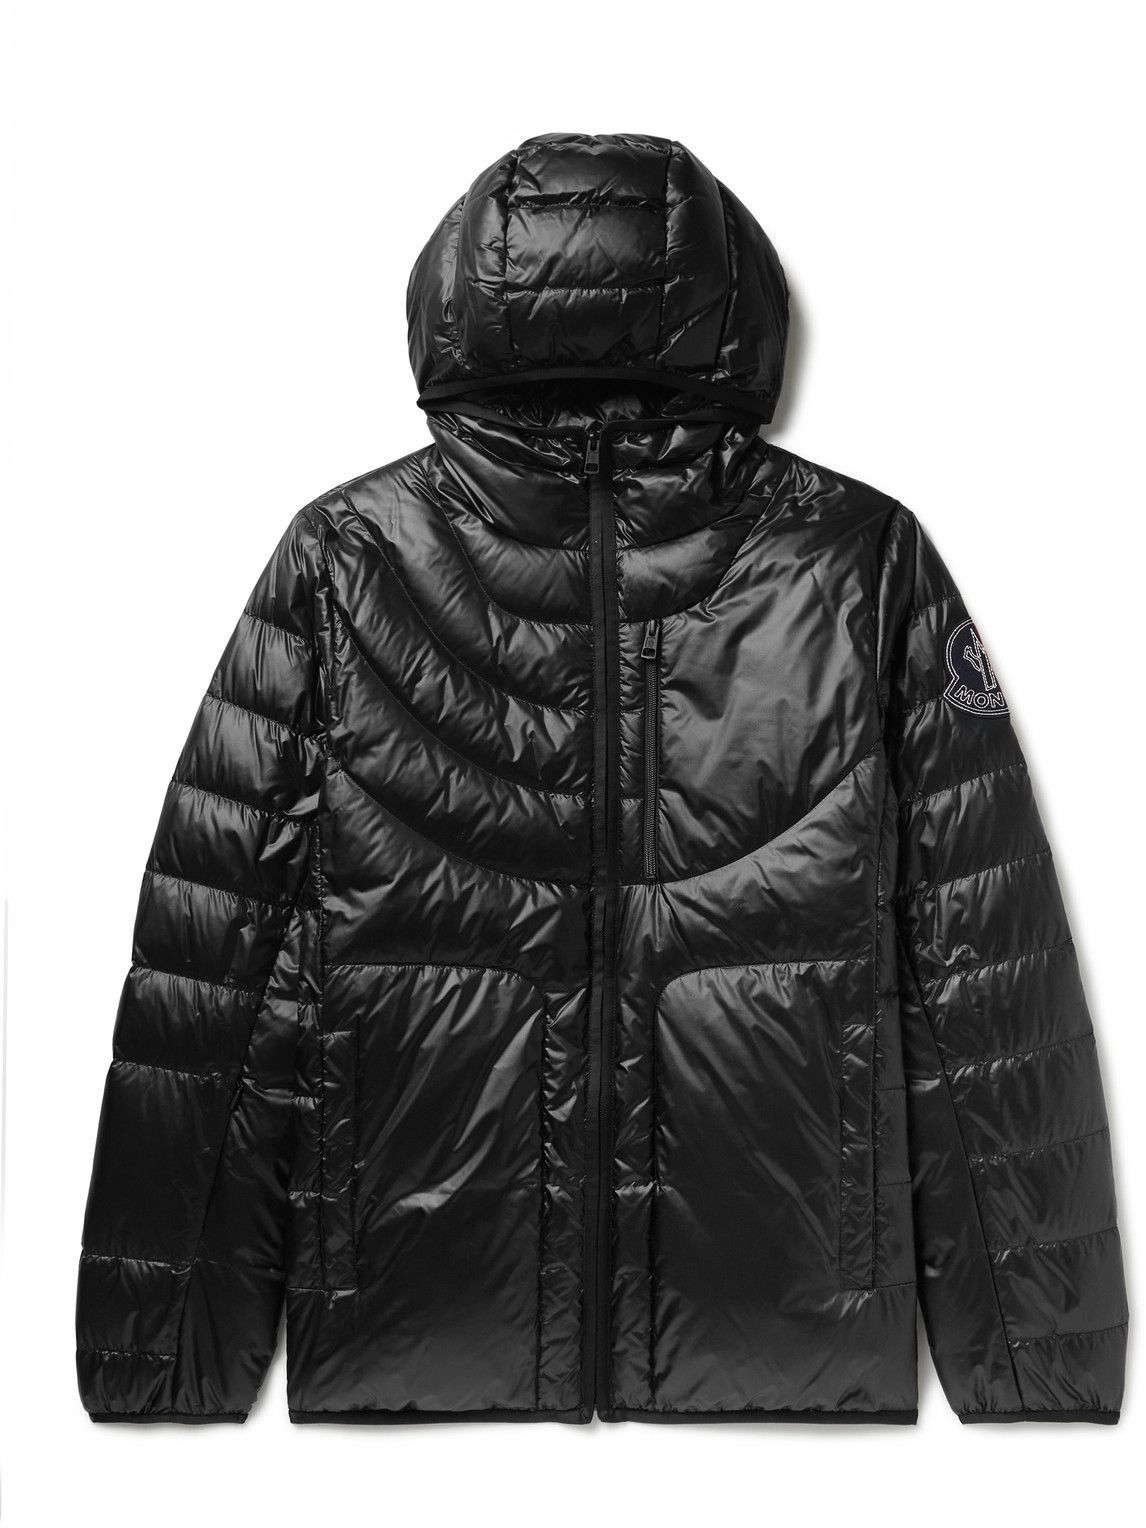 Moncler Genius - 2 Moncler 1952 Hissu Slim-Fit Quilted Shell Hooded ...